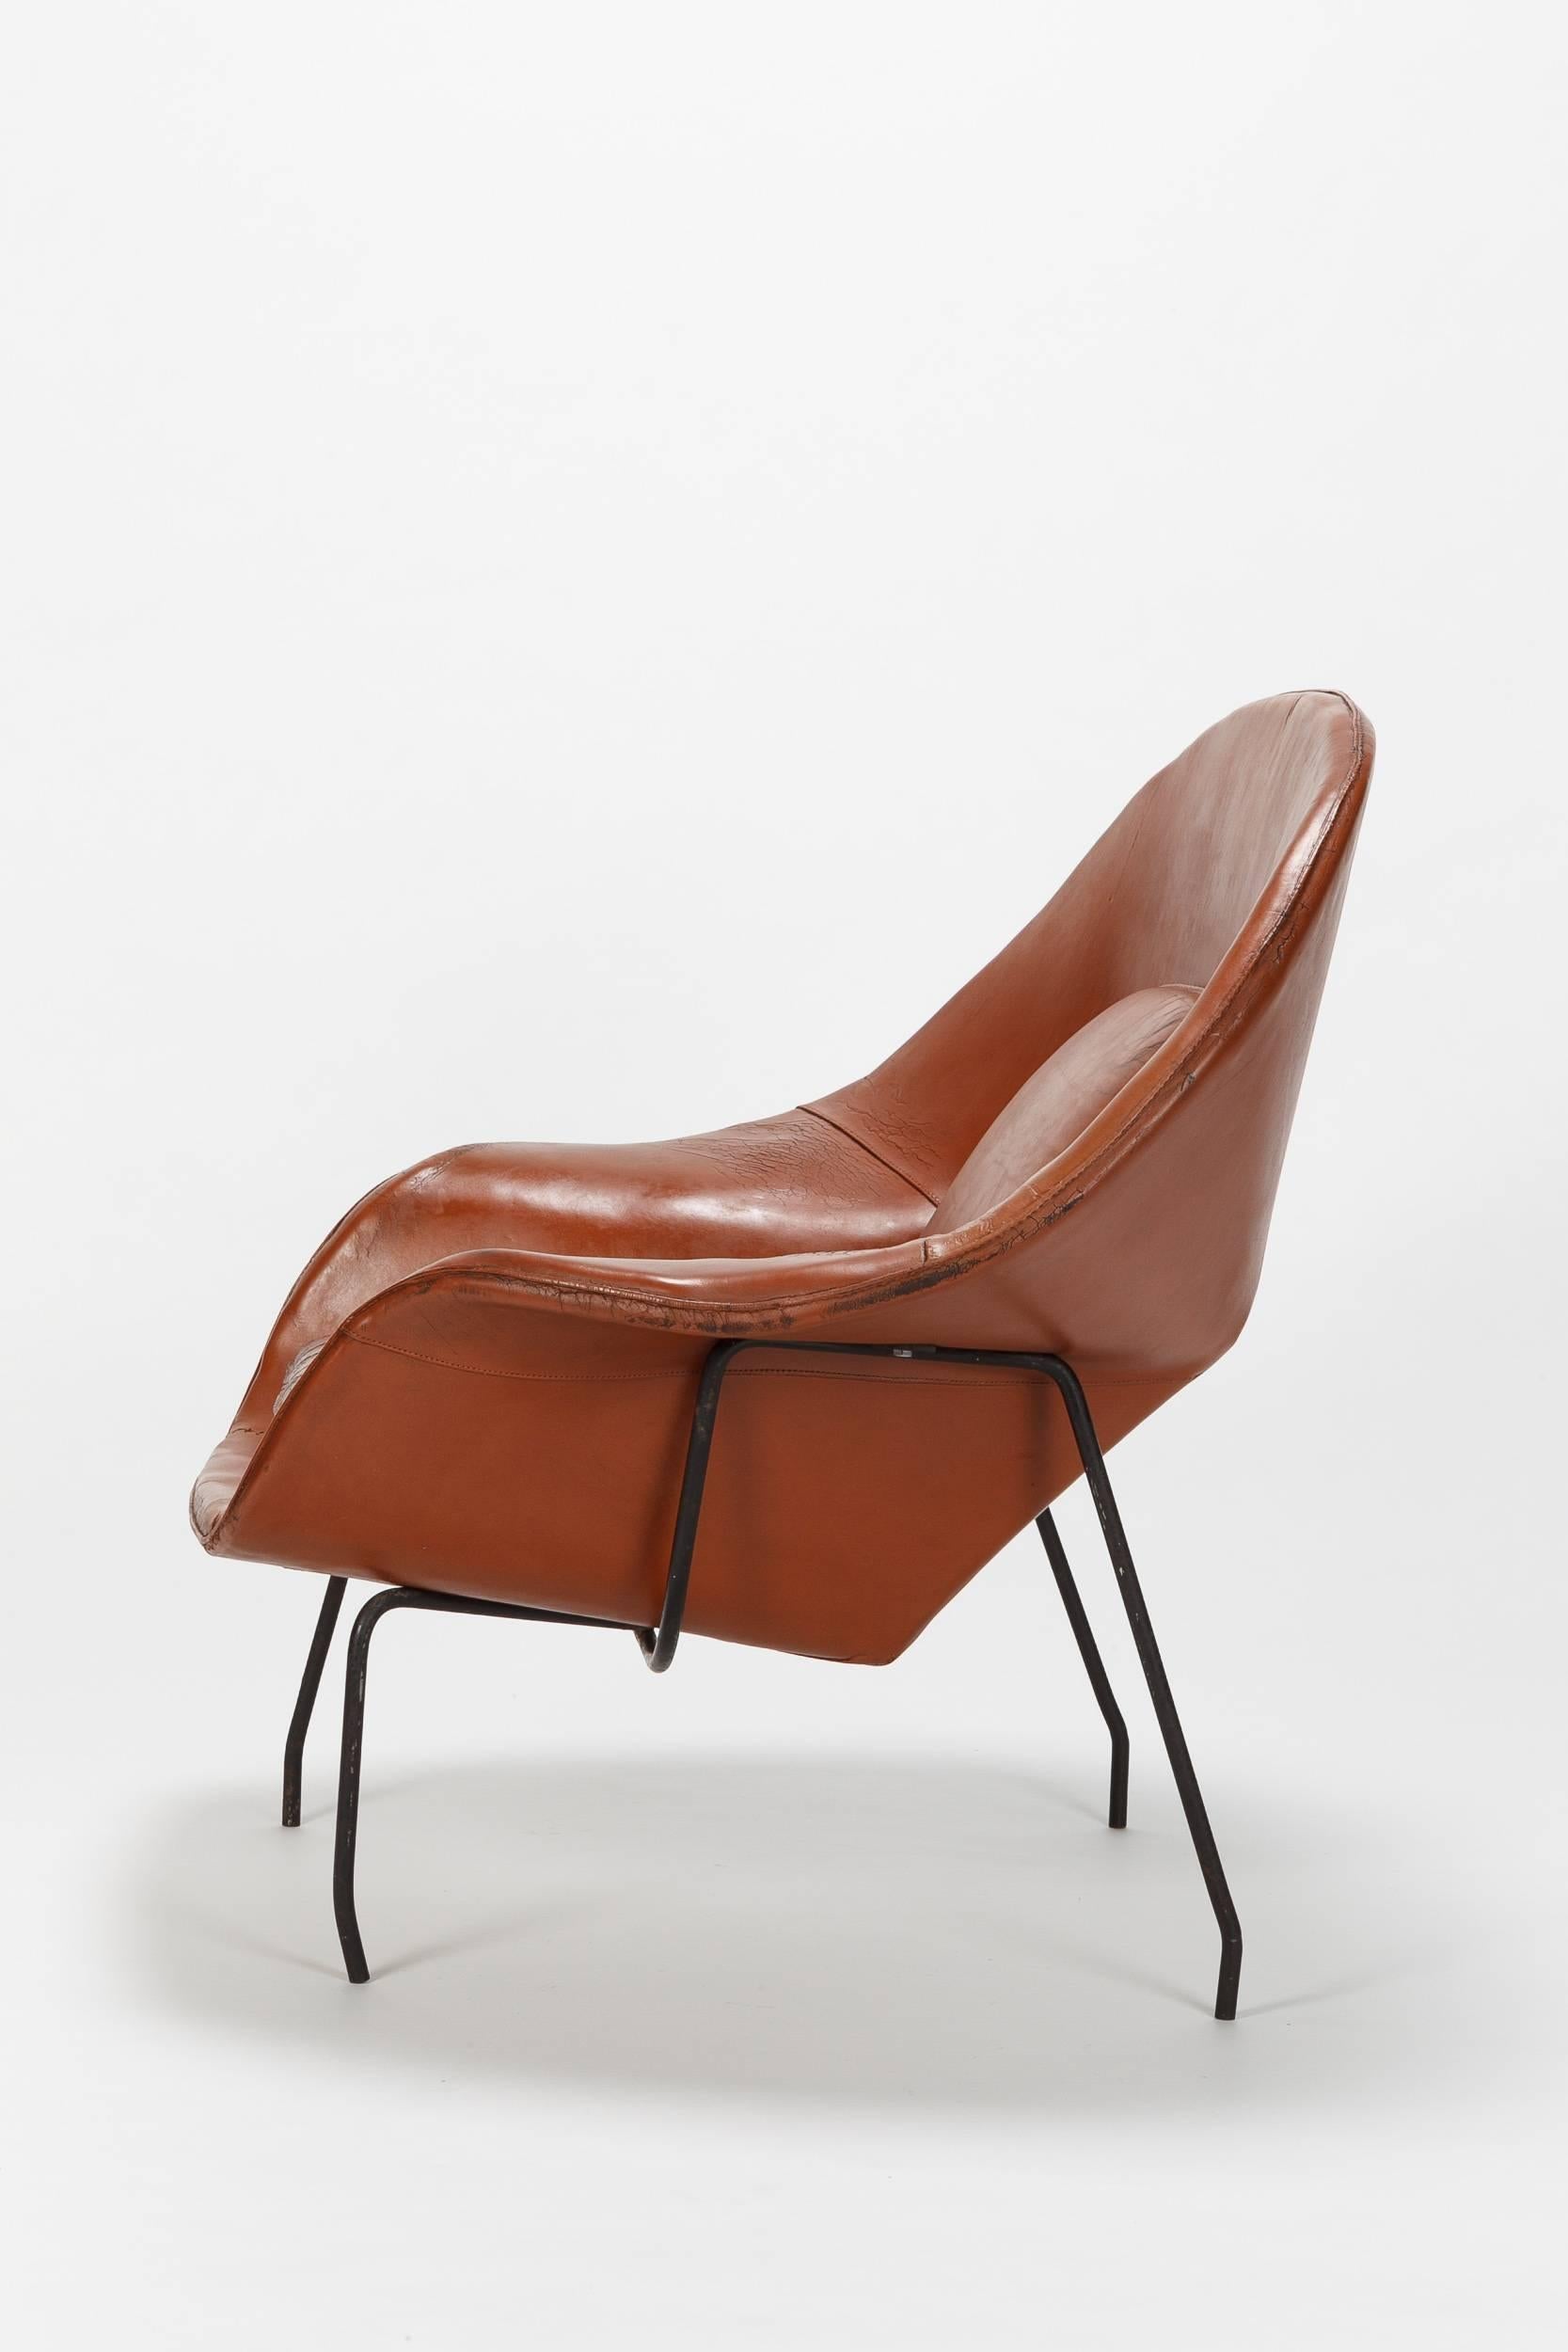 florence knoll womb chair